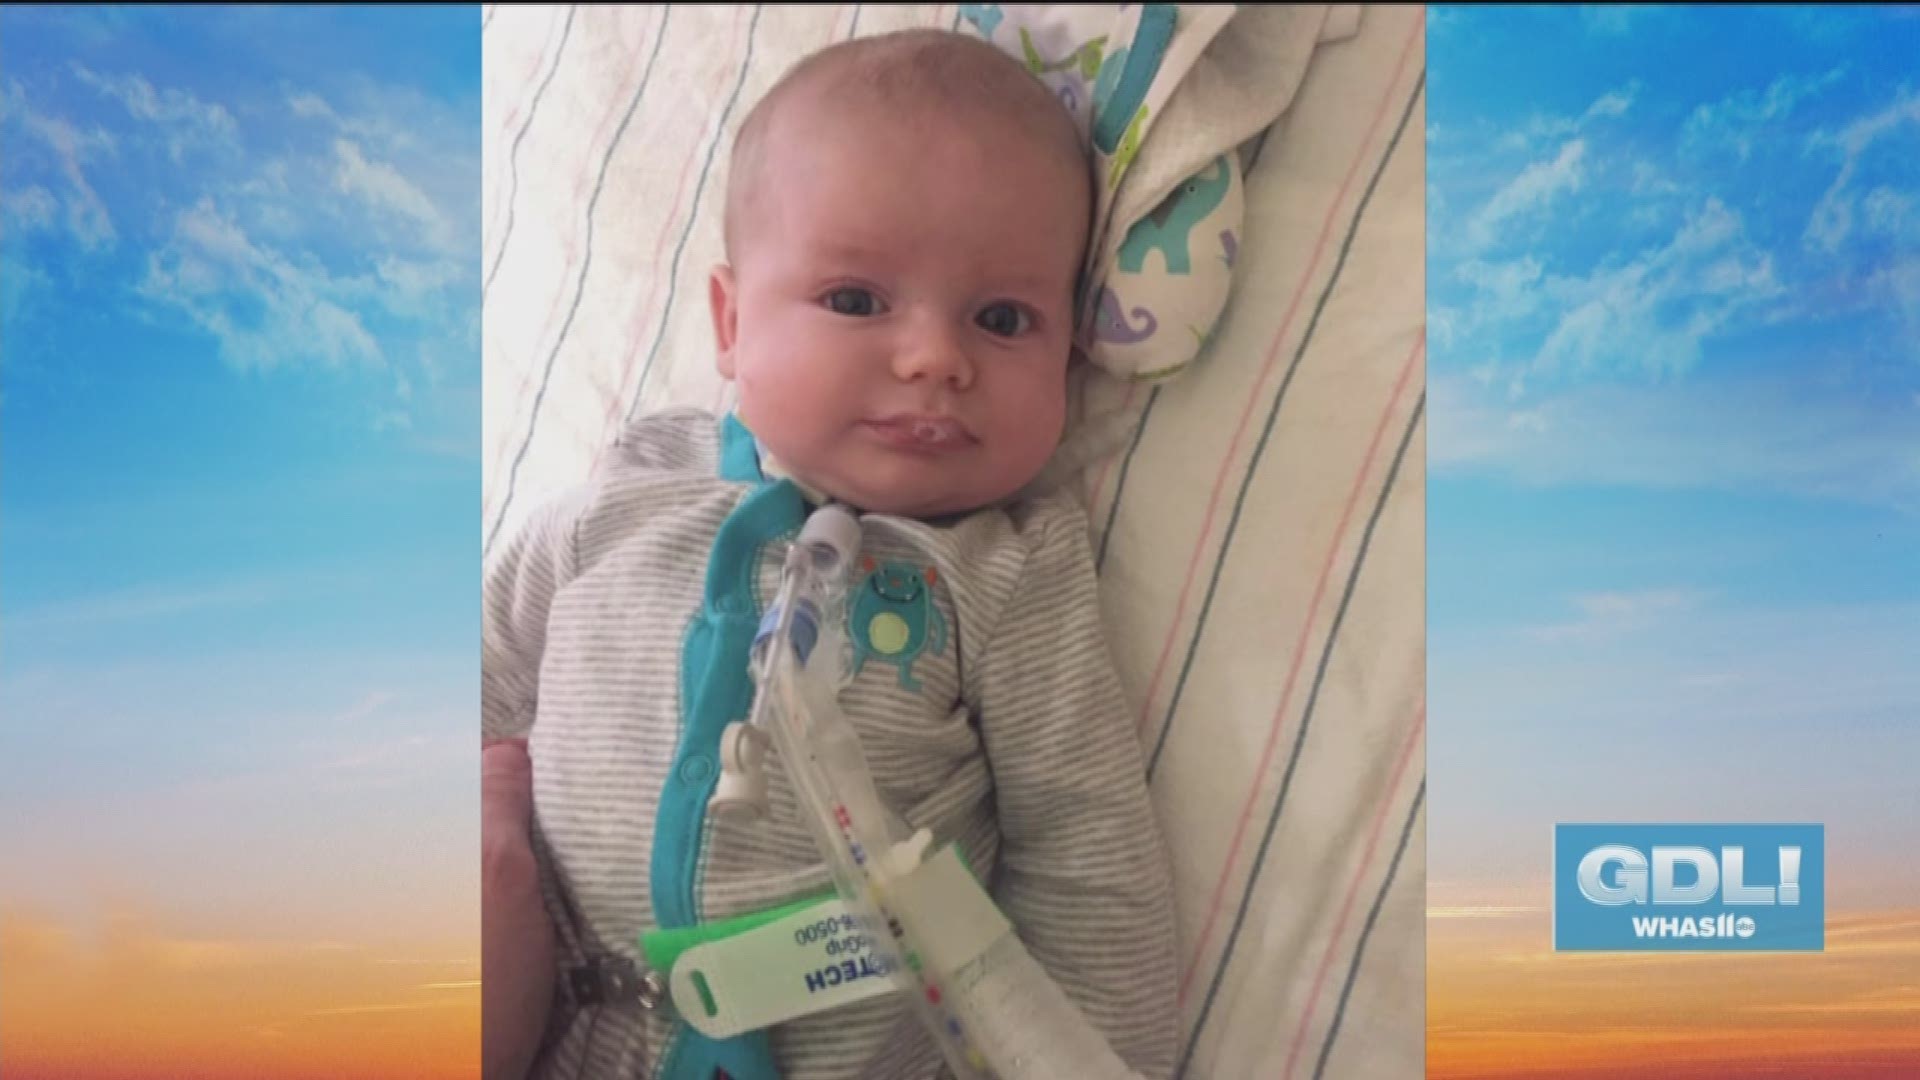 The Howell family is working to raise awareness about a rare condition called SMARD, which their infant son was diagnosed with. The #SmashSMARD Challenge invites people to take a pie to the face in order to raise money and awareness.